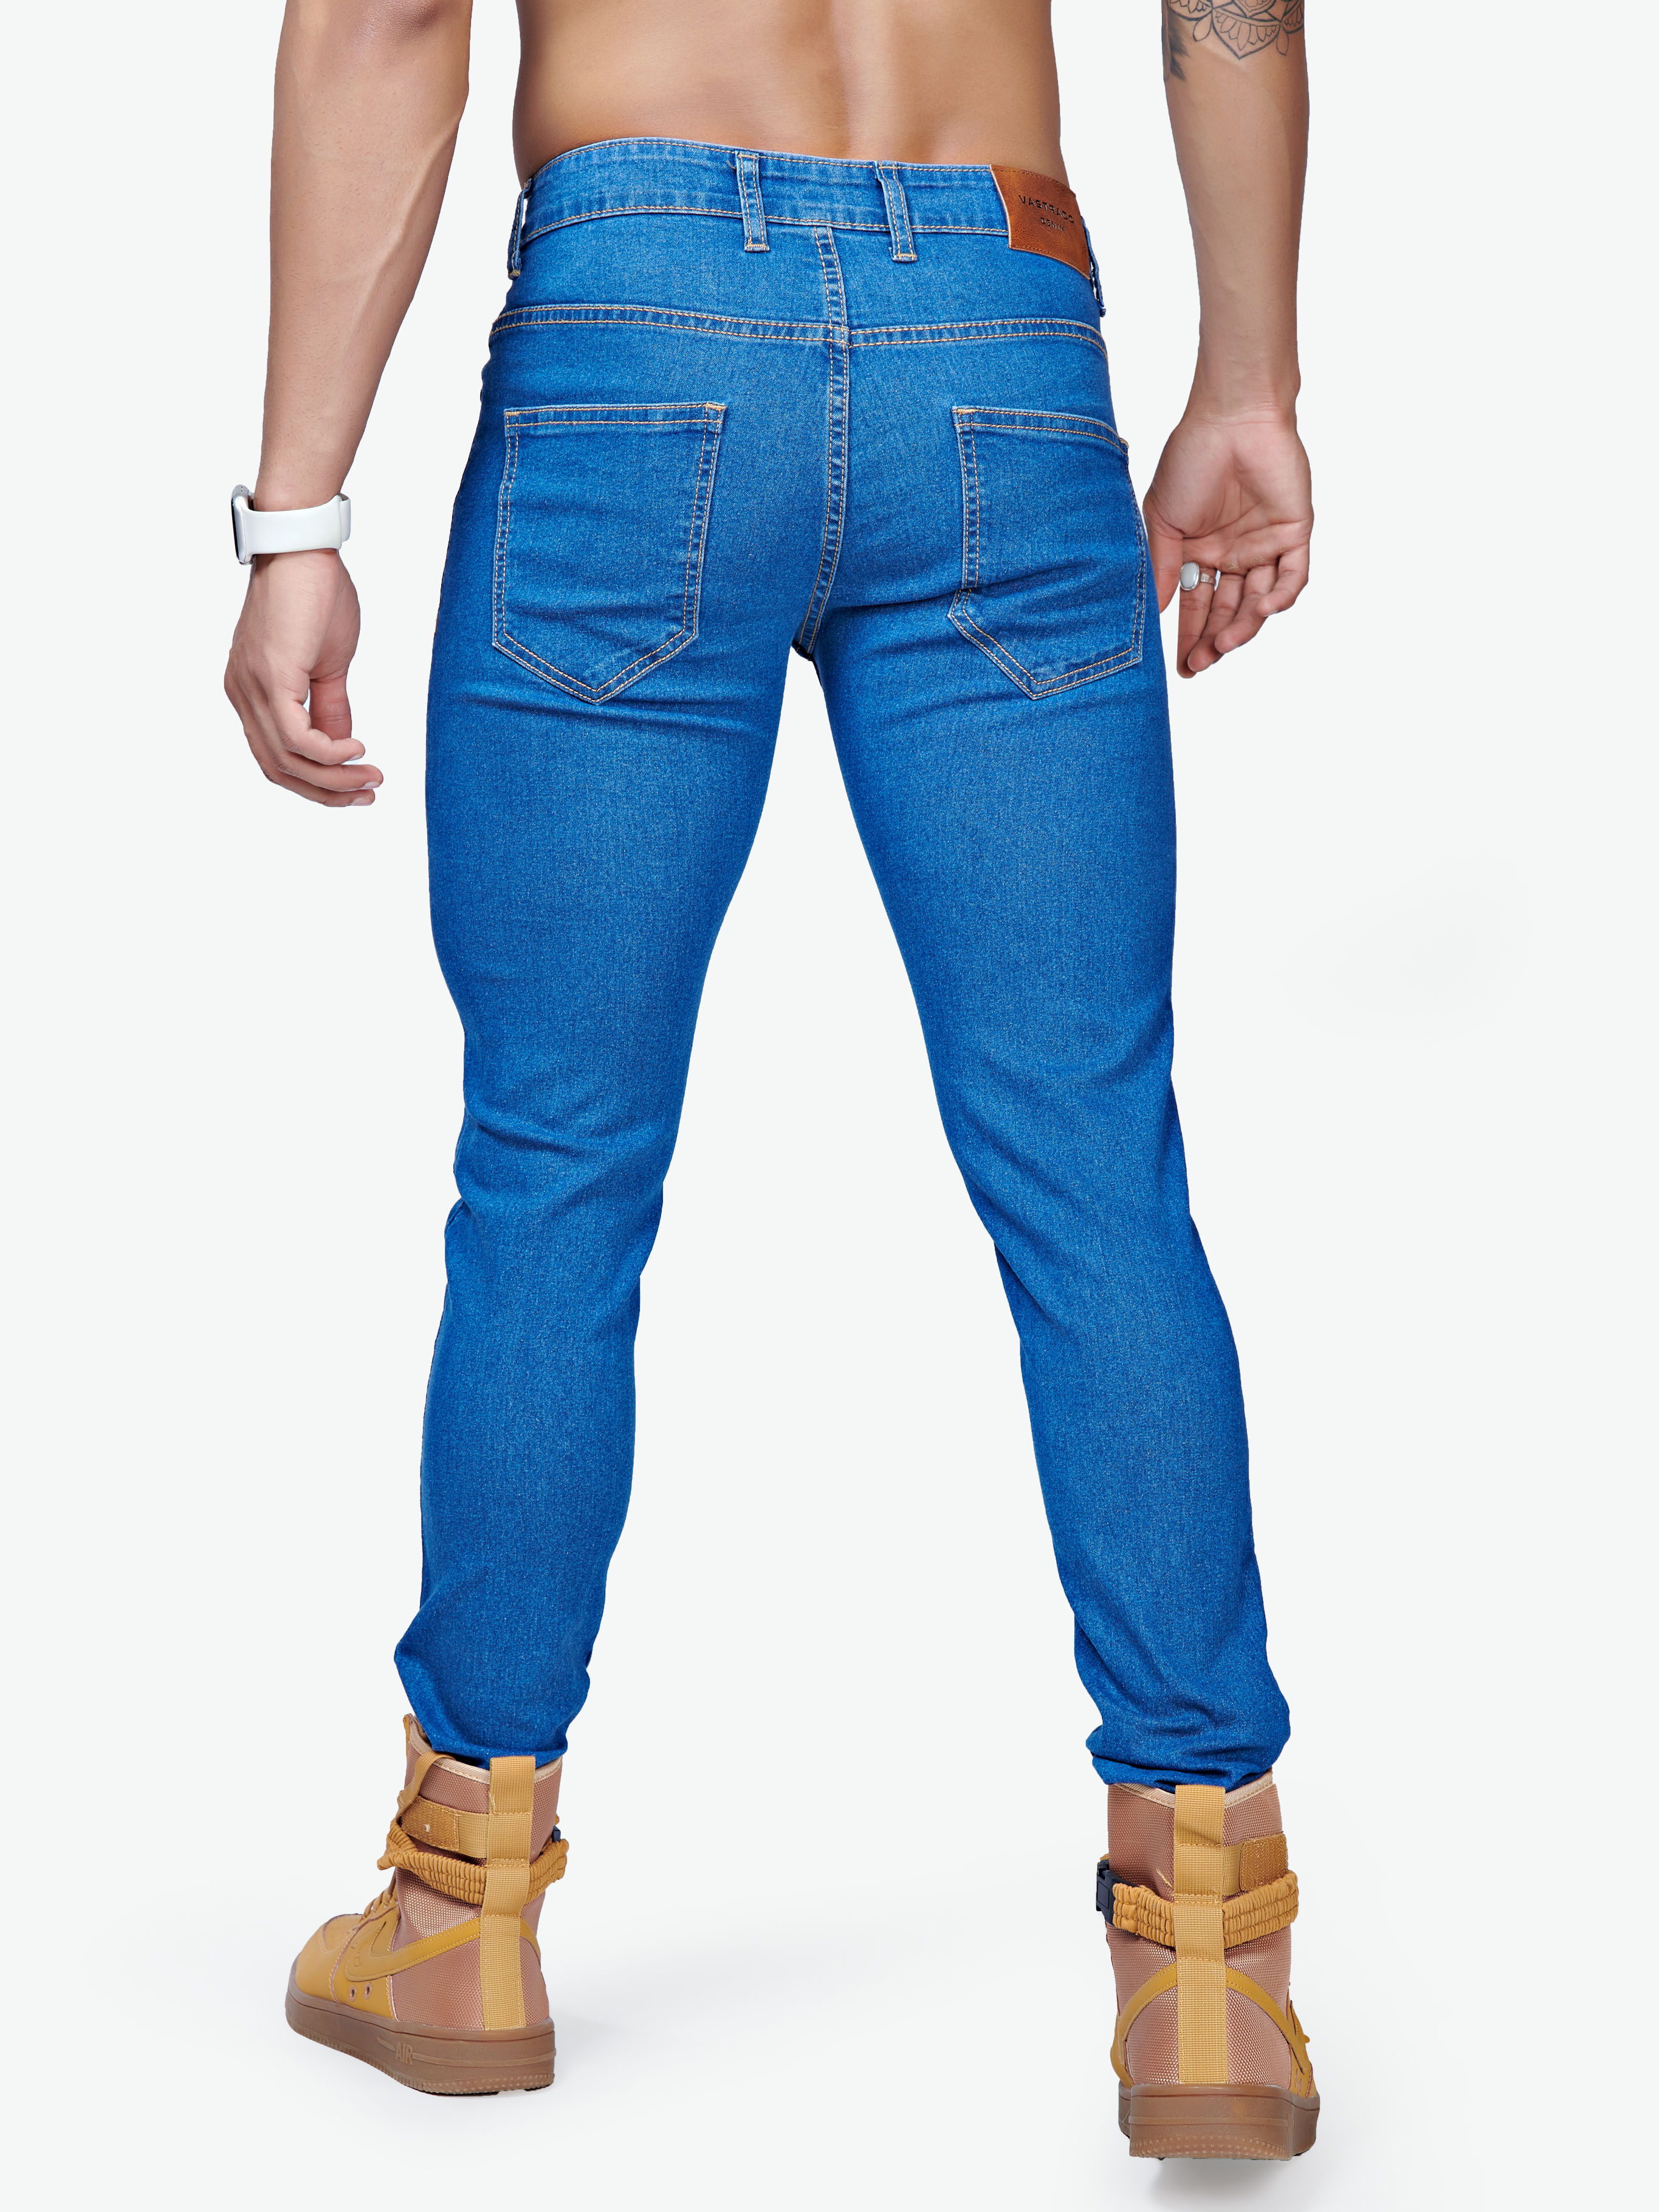 Share 133+ buy mens jeans latest